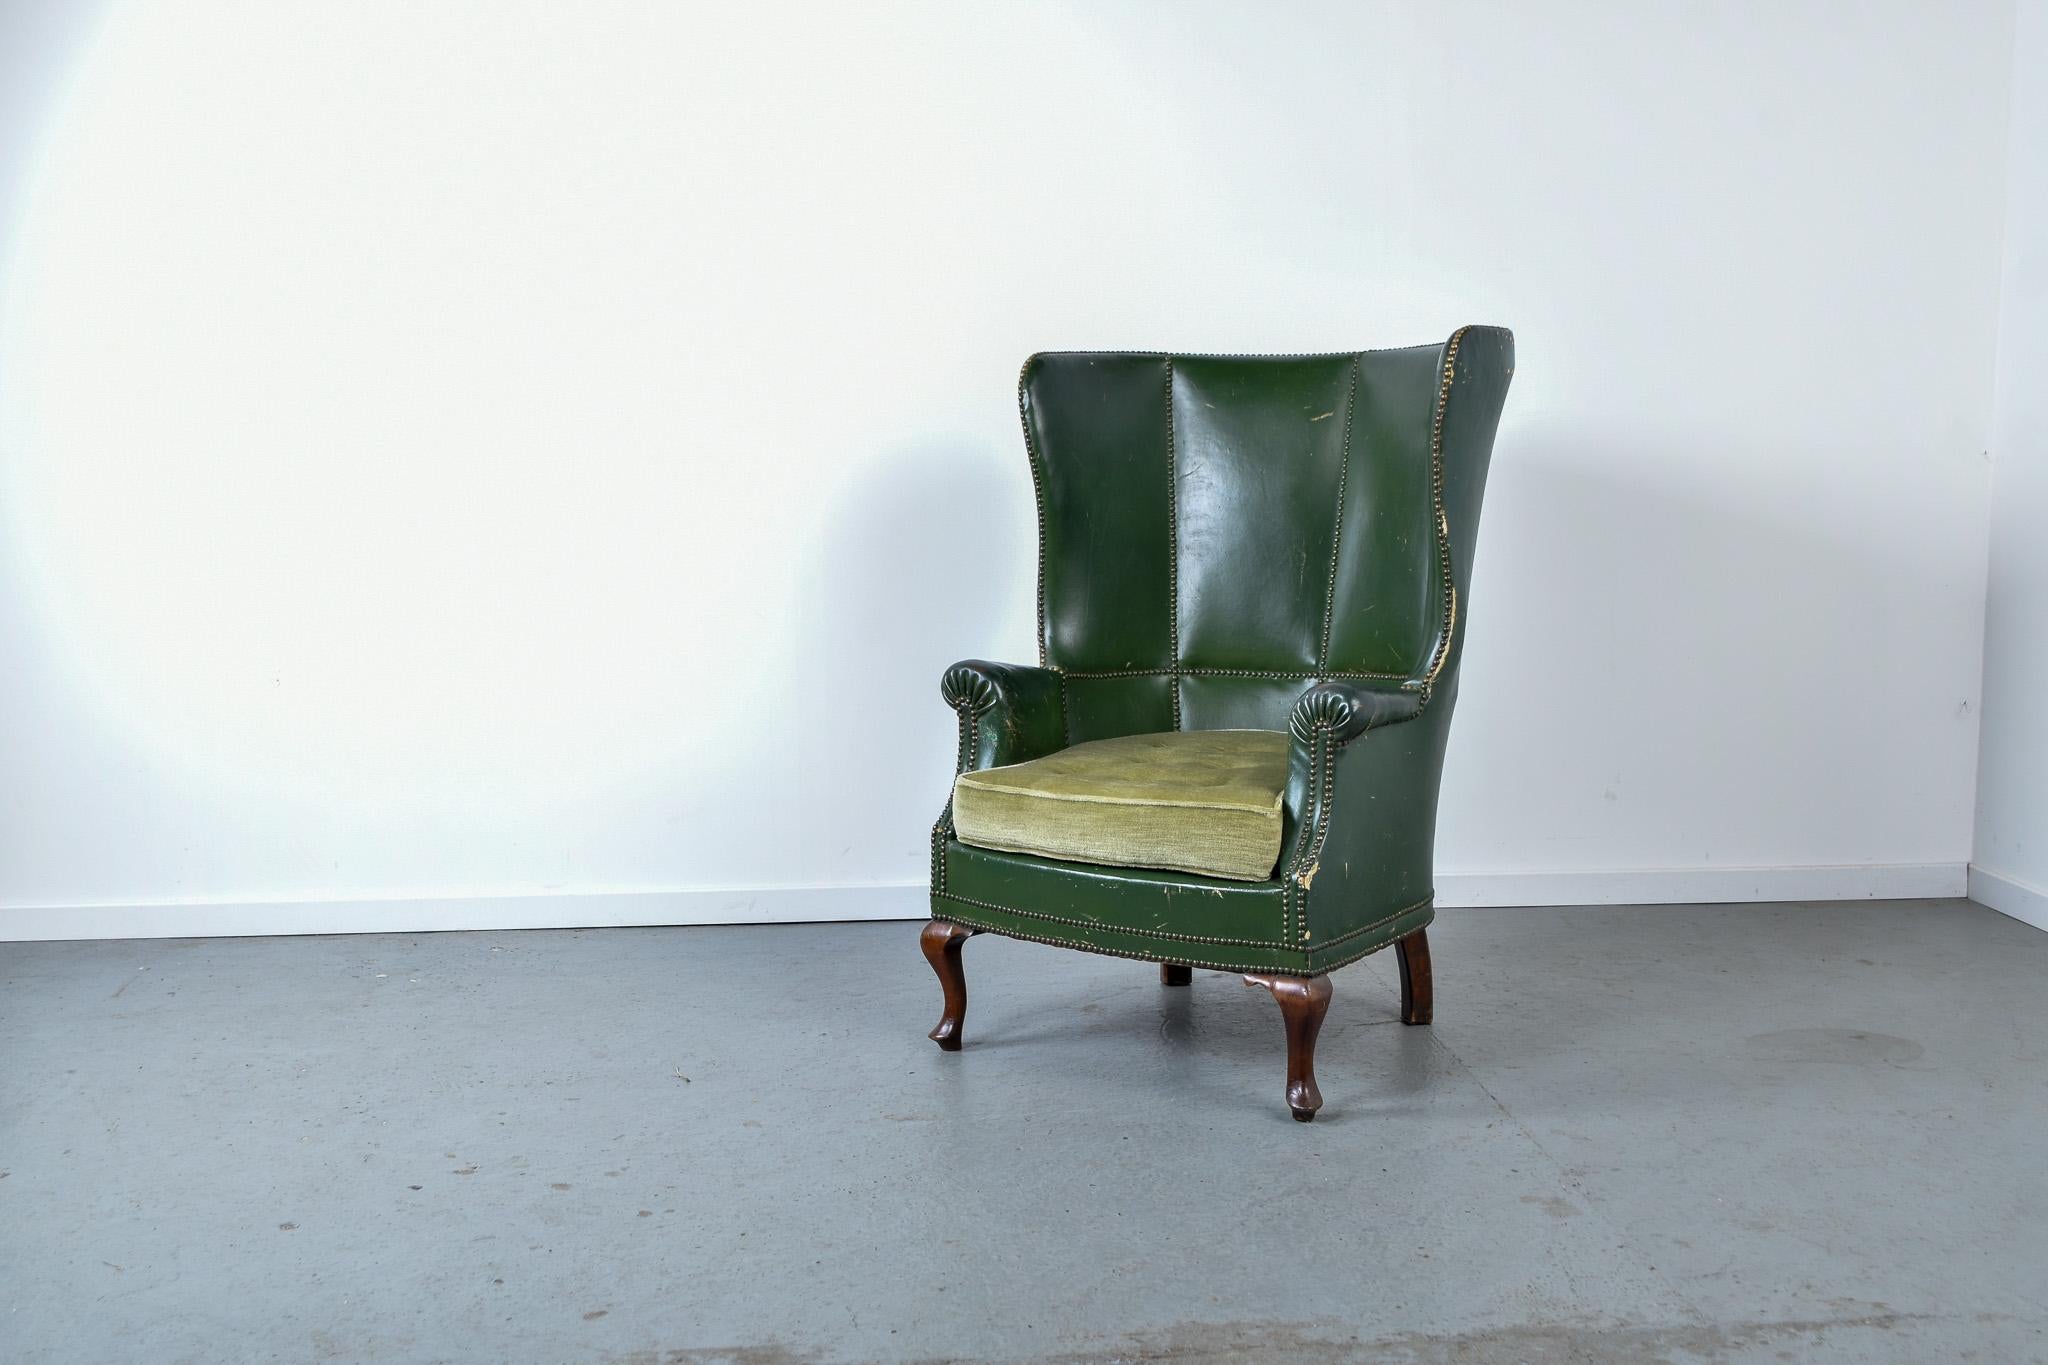 Generously sized barrel back wing armchair with claw feet. 

The chair has a nice patina which adds to the asthetic of the chair.

The chair is upholstered in green leather with brass topped decorative nails and a green mohair seat.

It has signs of